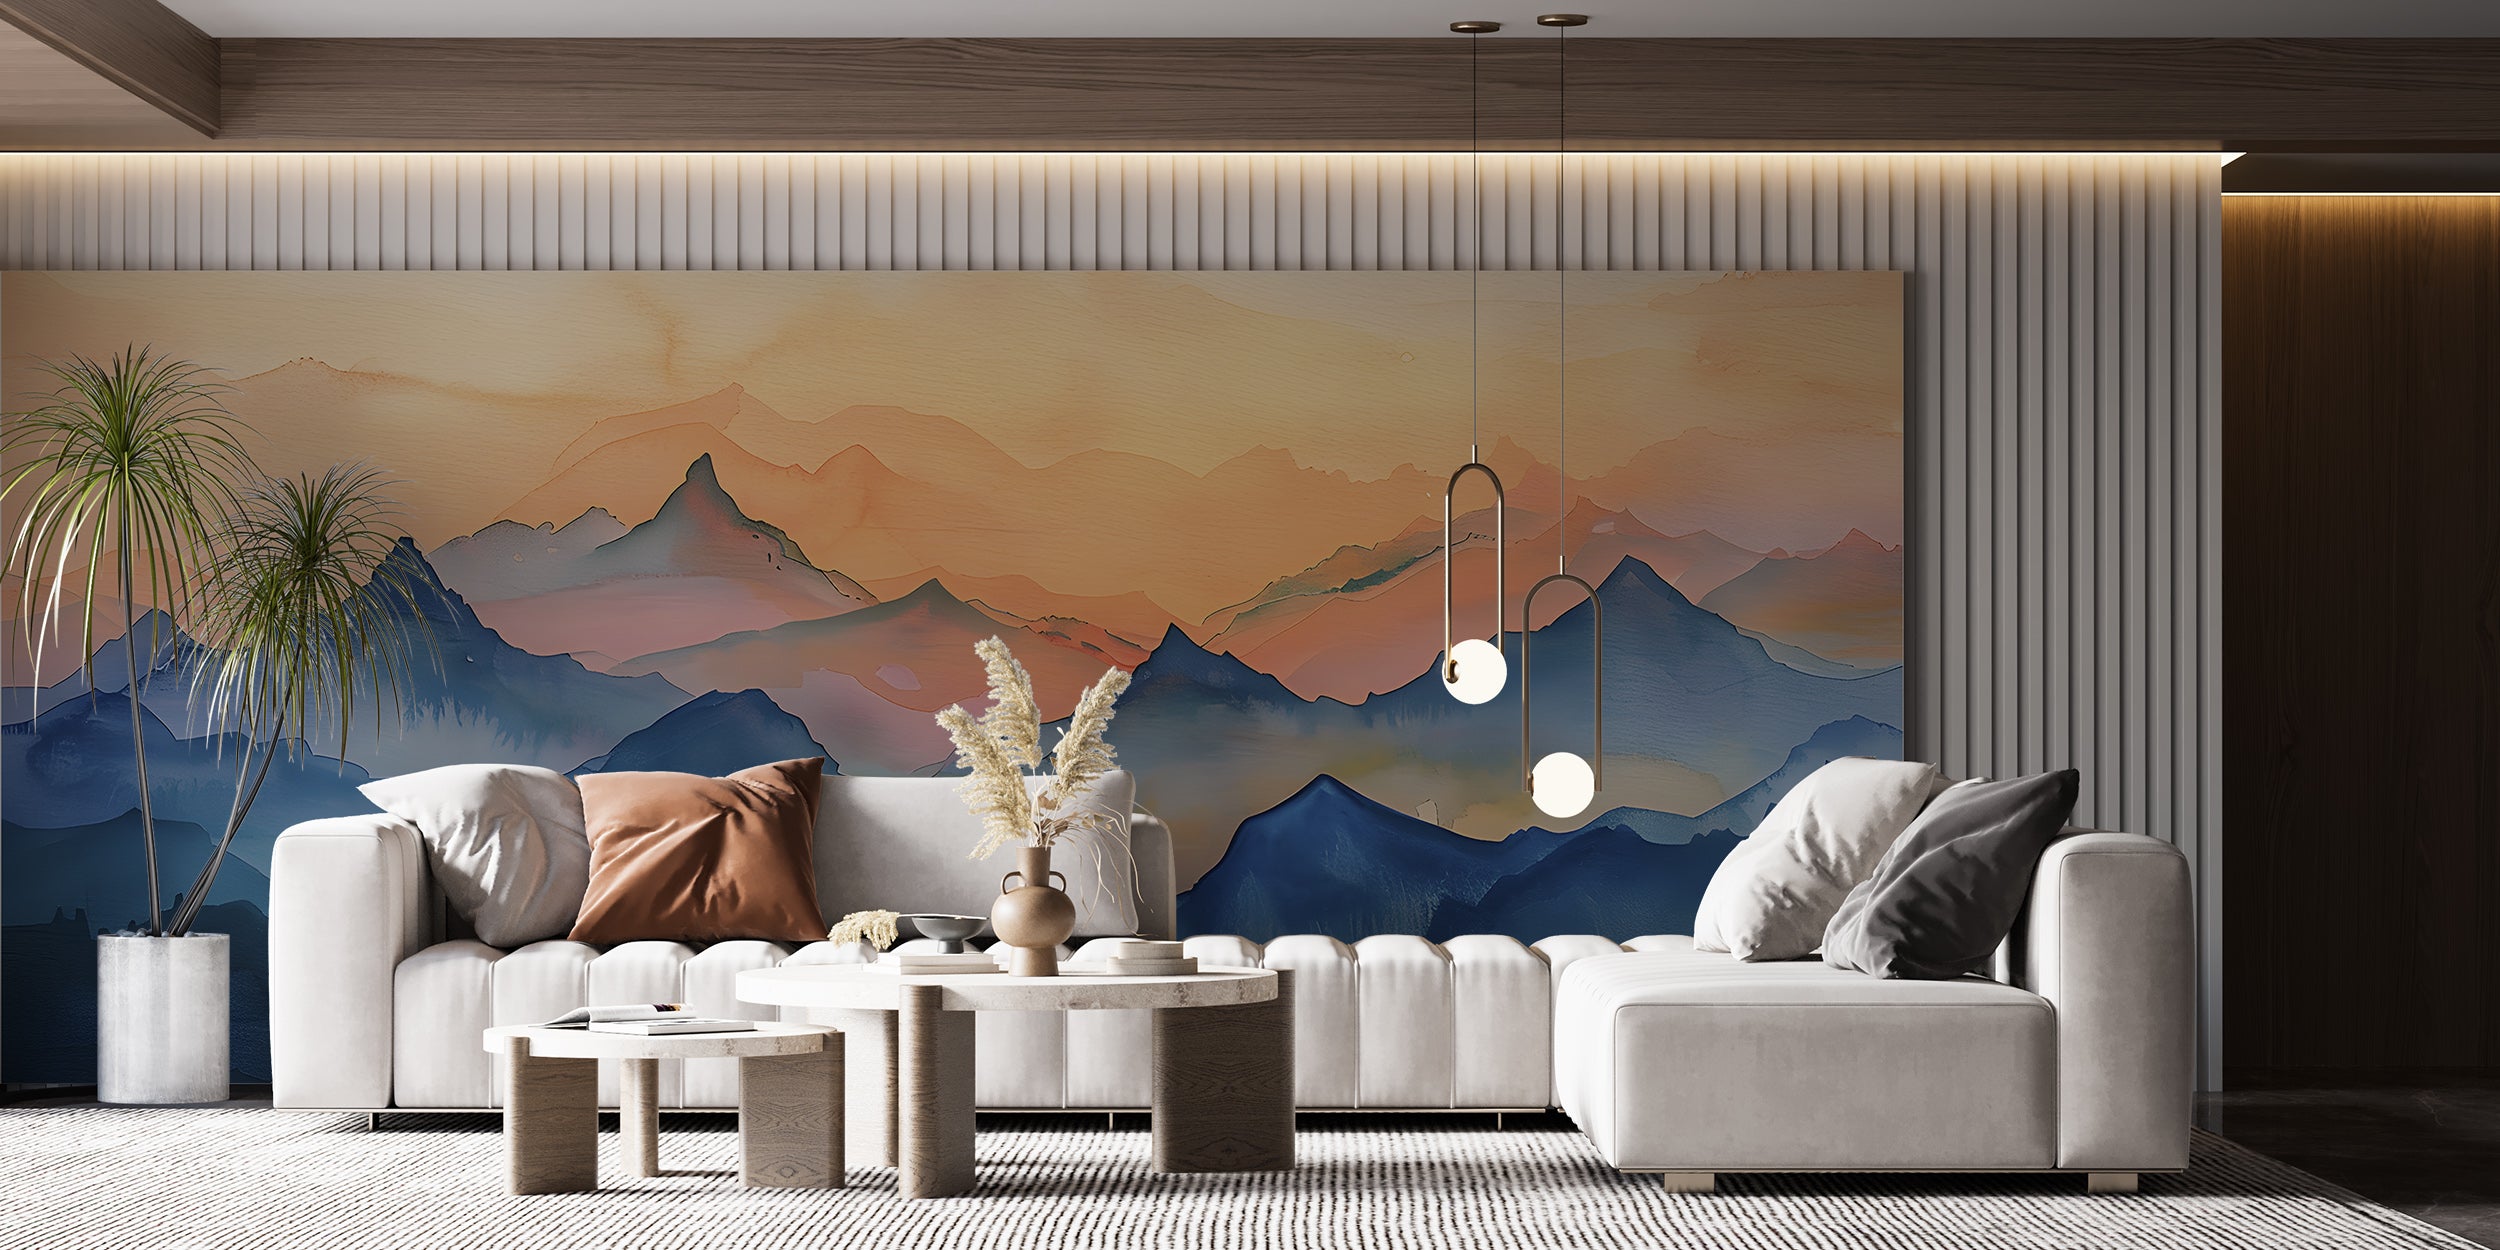 Mountain Sunset Mural, Pastel Blue and Orange Mountains Landscape, Peel and Stick Watercolor Nursery Wall Decor, Custom Size Unique Art